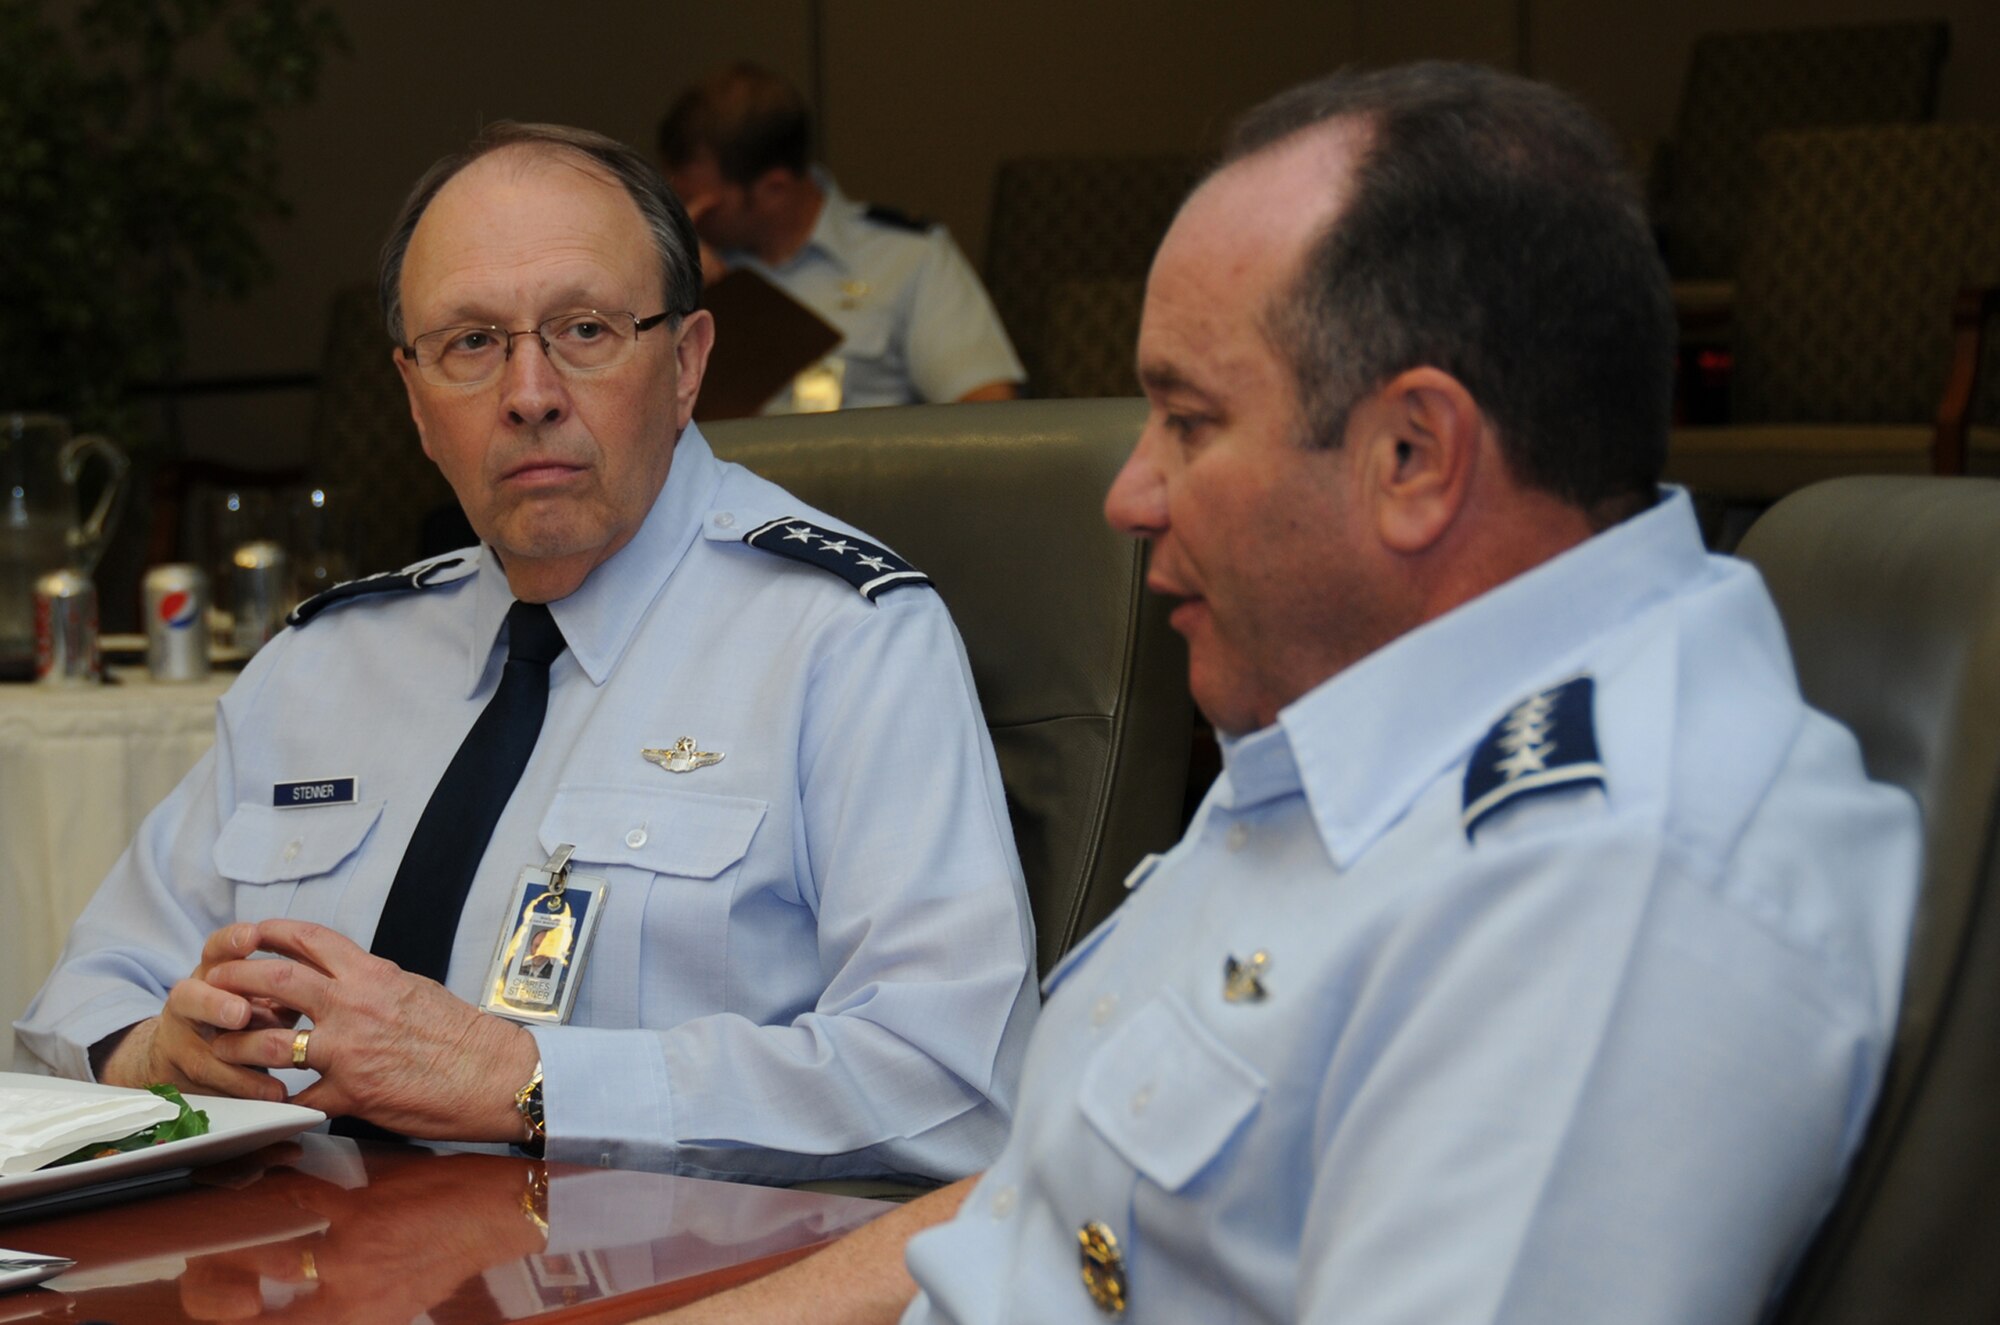 ROBINS AIR FORCE BASE, Ga. -- Lt. Gen. Charles E. Stenner, Jr., commander,  Air Force Reserve Command, discusses command issues with Gen. Philip Breedlove, Air Force vice chief of staff, during a two-hour visit to AFRC headquarters April 30, 2012. Stenner and the command’s senior staff briefed U.S. Congressman Austin Scott, (R-GA) and Breedlove on manpower, budget, Total Force Integration initiatives and the Force Generation Center. (U.S. Air Force photo/Philip Rhodes) 